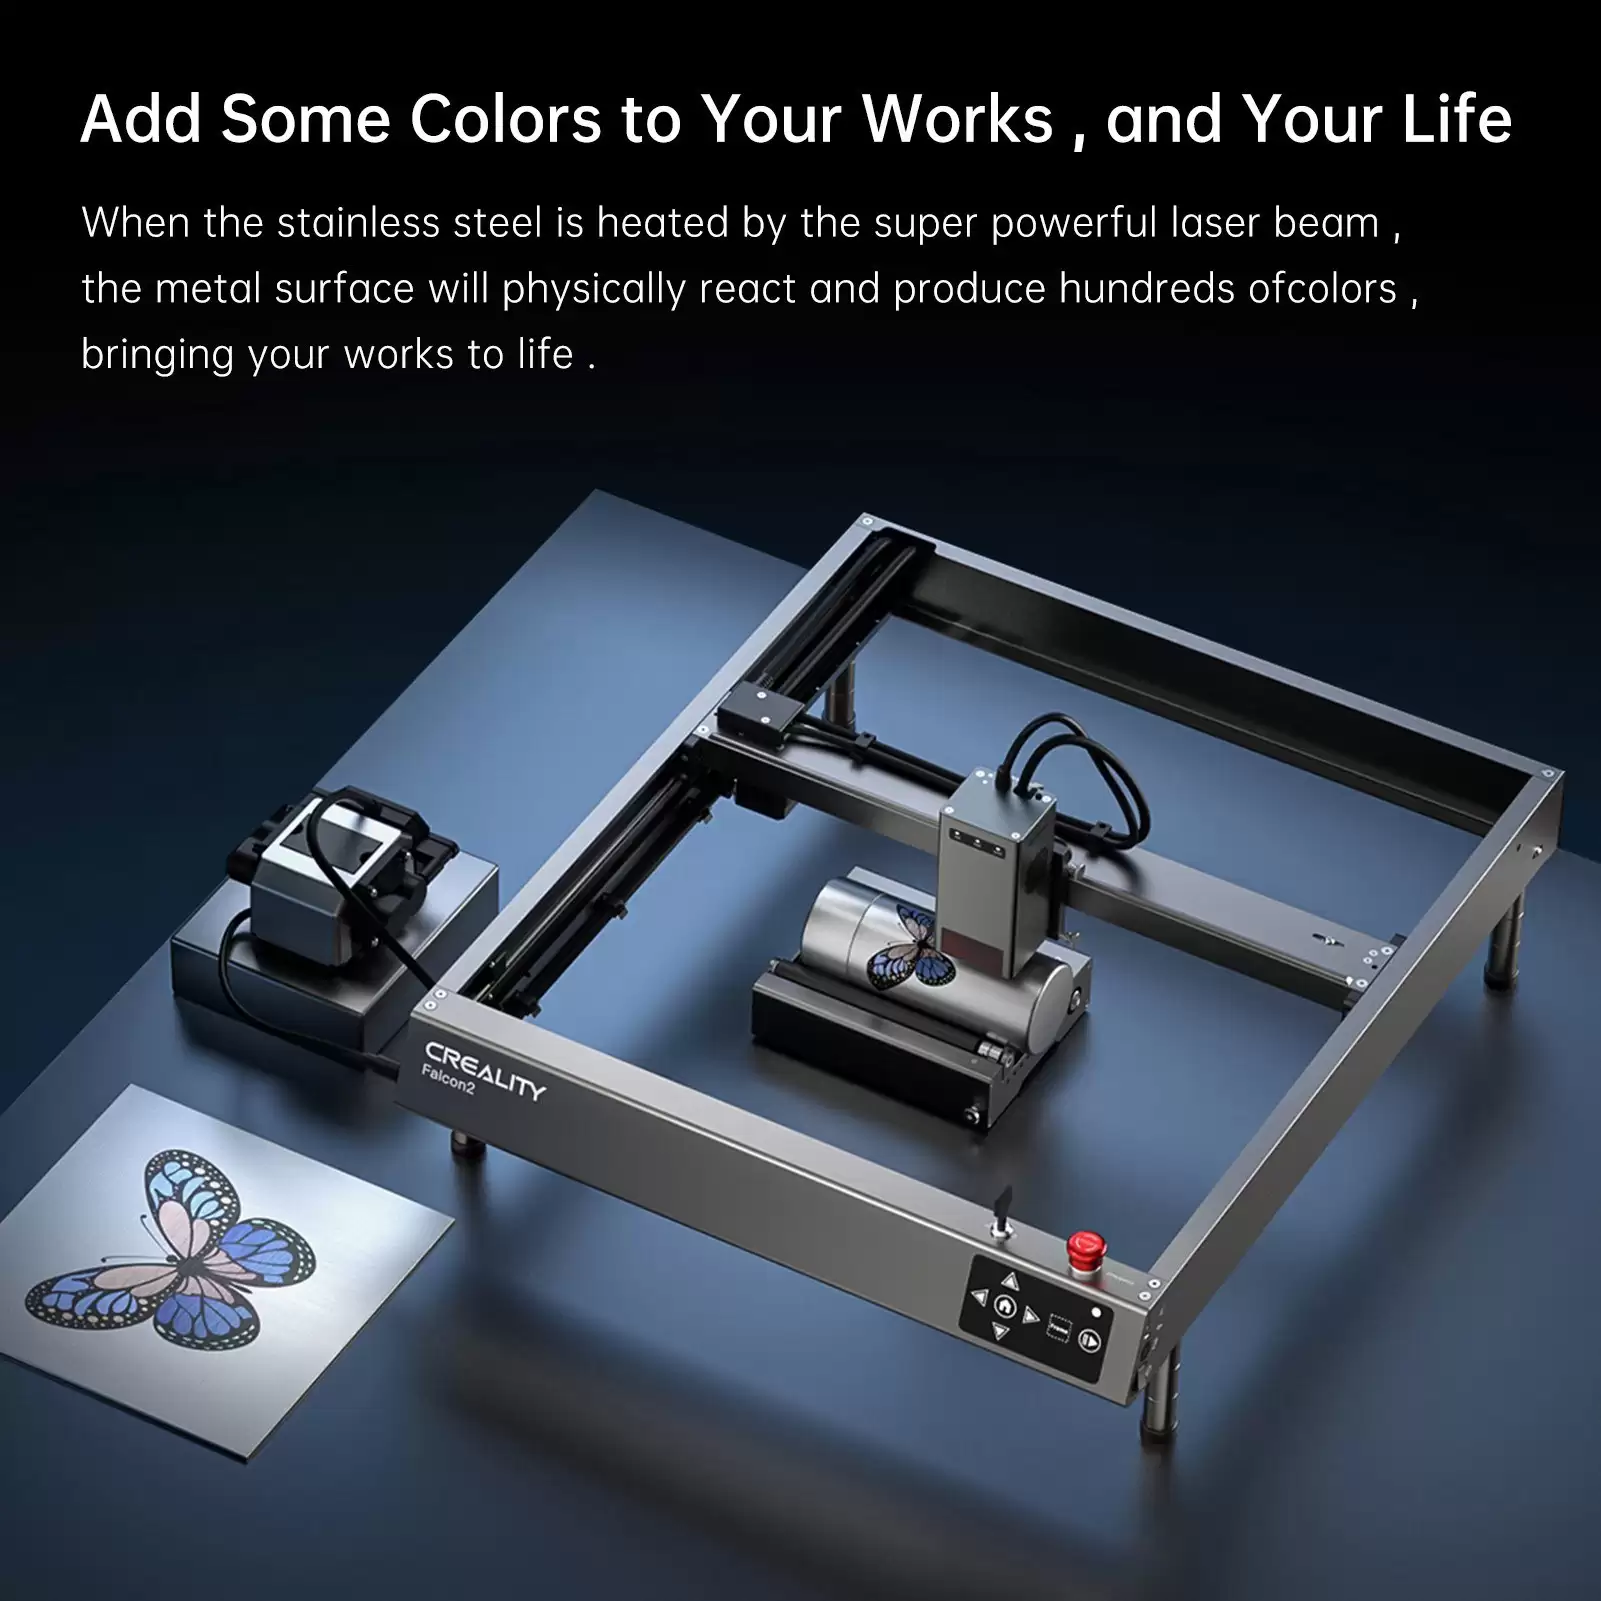 Spend $764.34 Creality 3d Falcon2 22w Laser Engraver Using This Cafago Discount Code